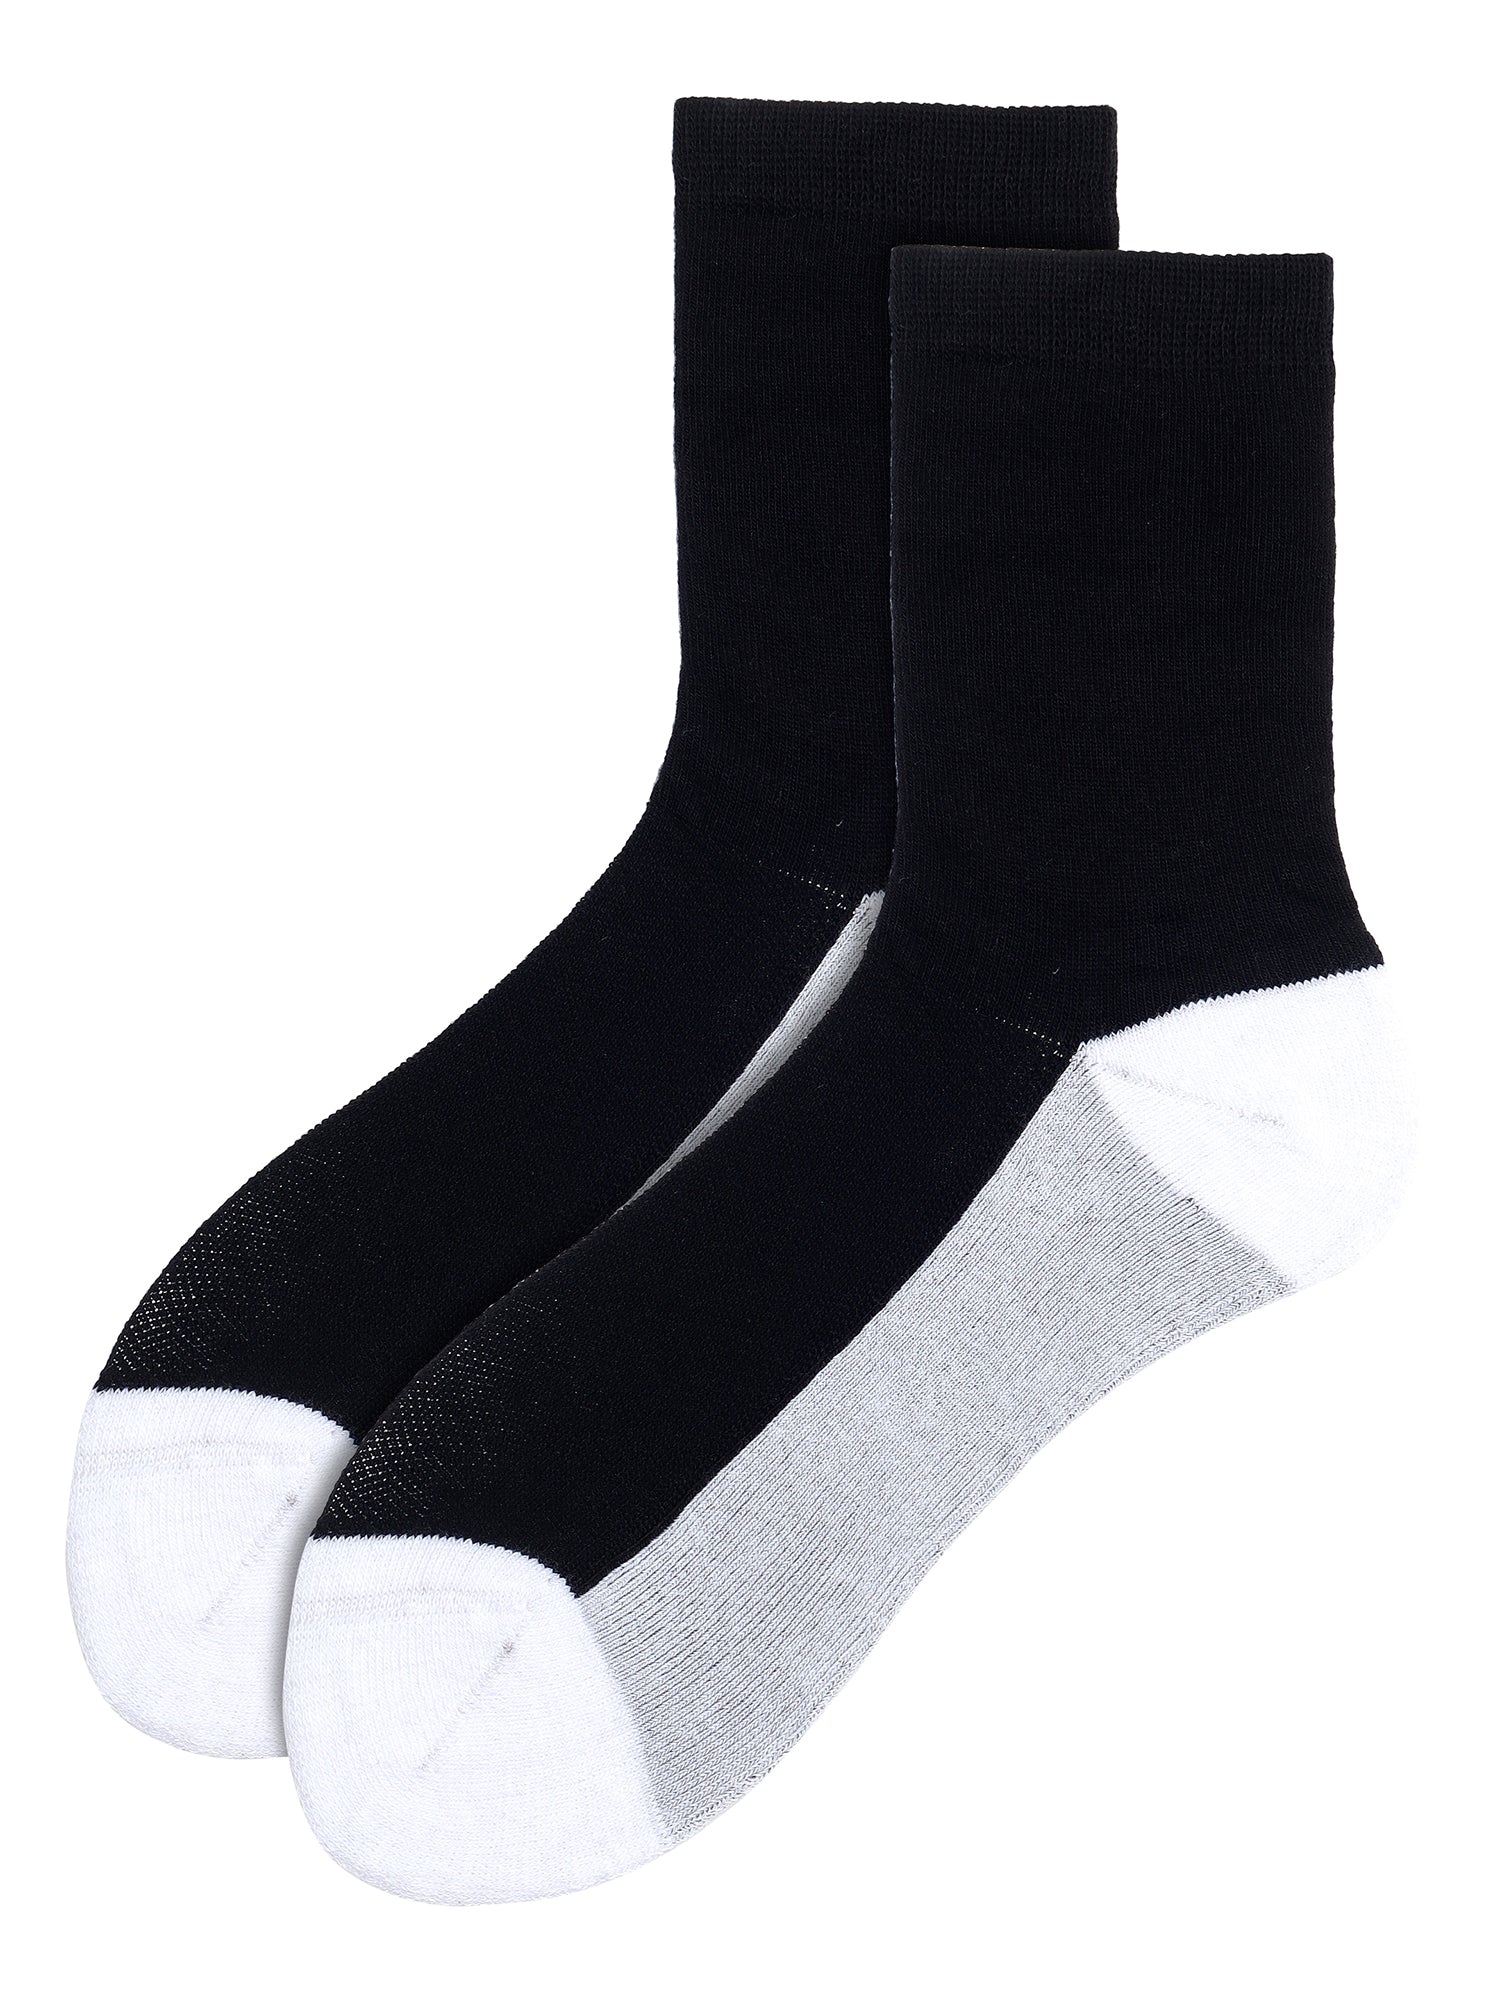 Diabetic Care | Stand Out Box Of 4 Pairs | Mid Calf Crew Socks